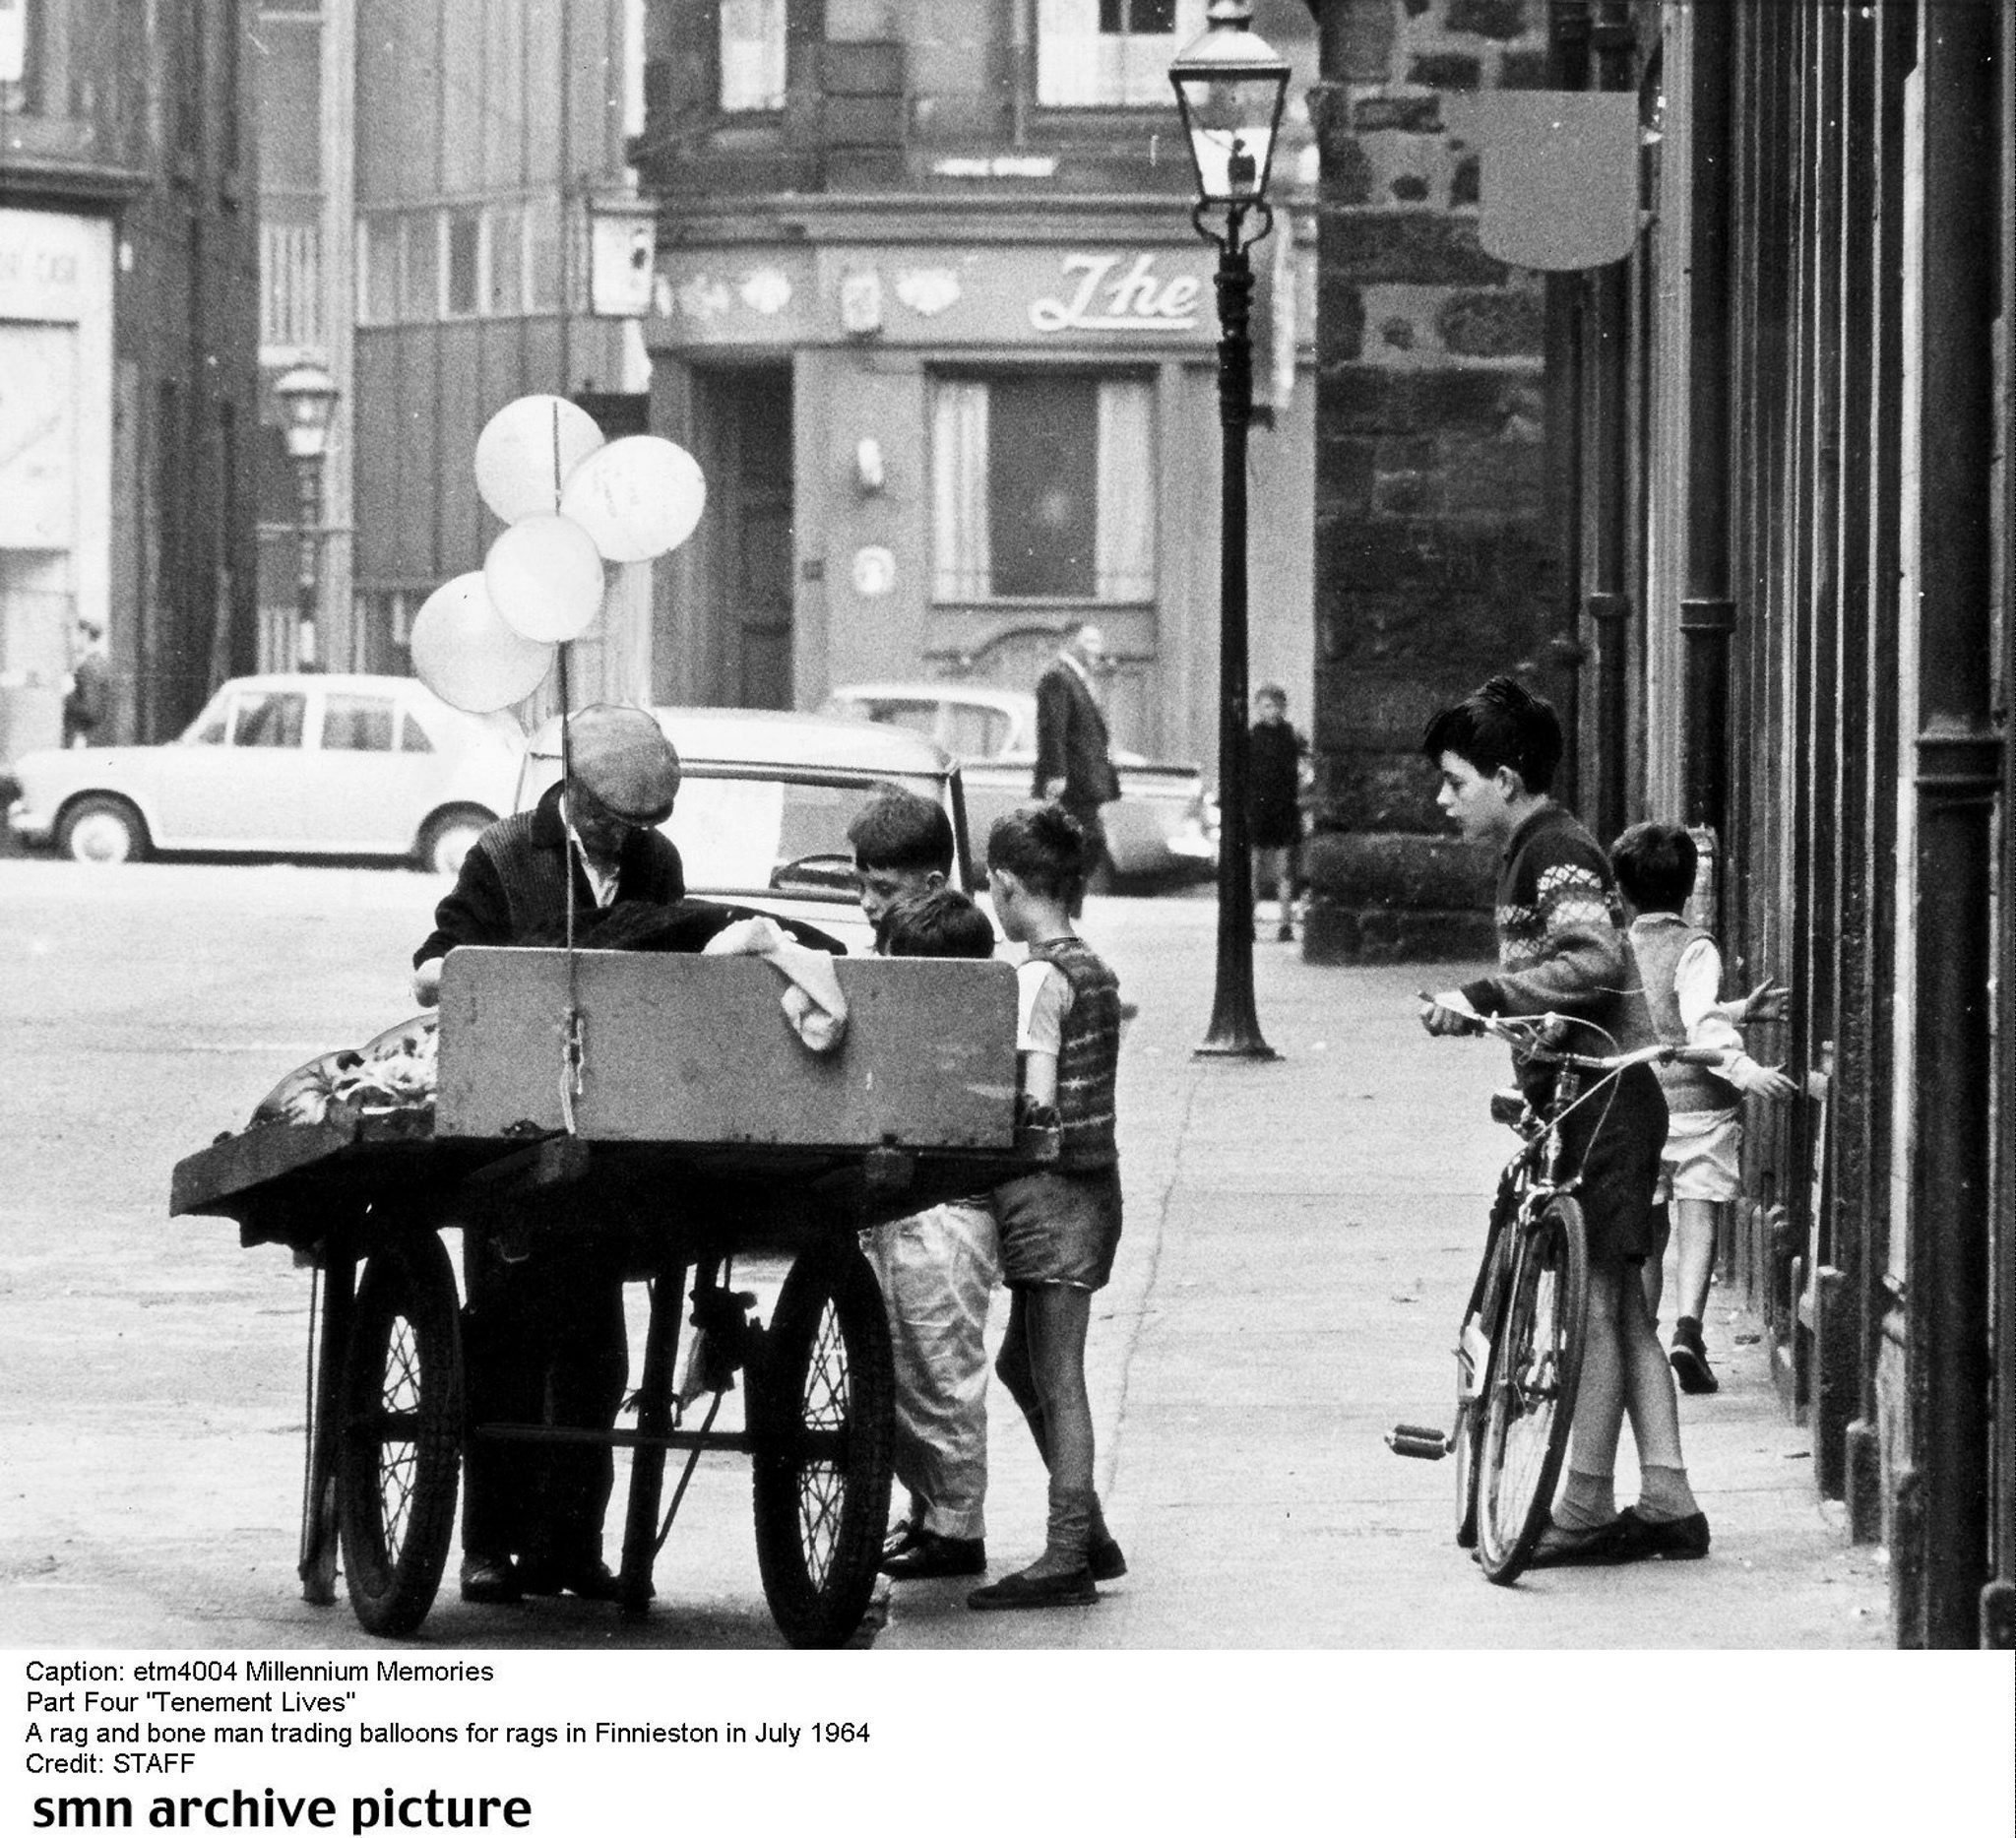 A rag and bone man trading balloons for rags in Finnieston in July 1964. Pic: Herald and Times